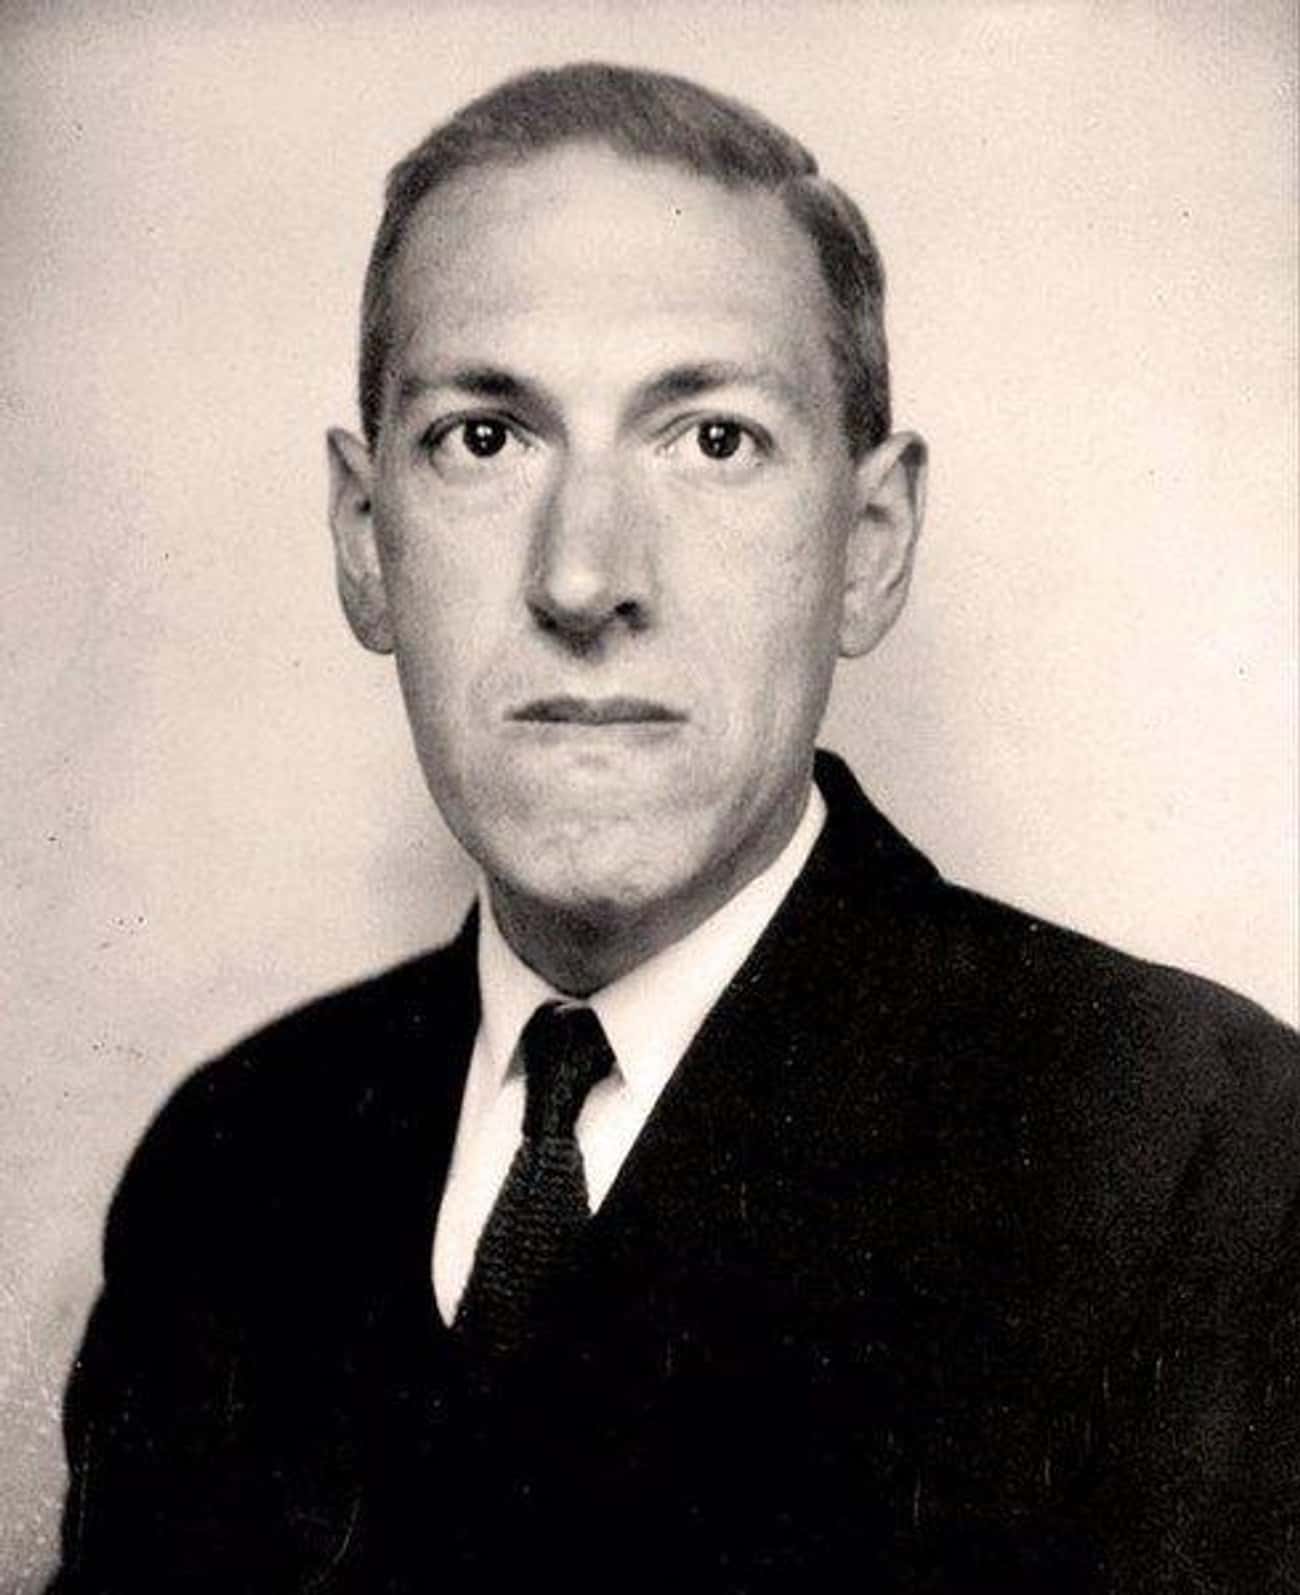 He Adored H.P. Lovecraft